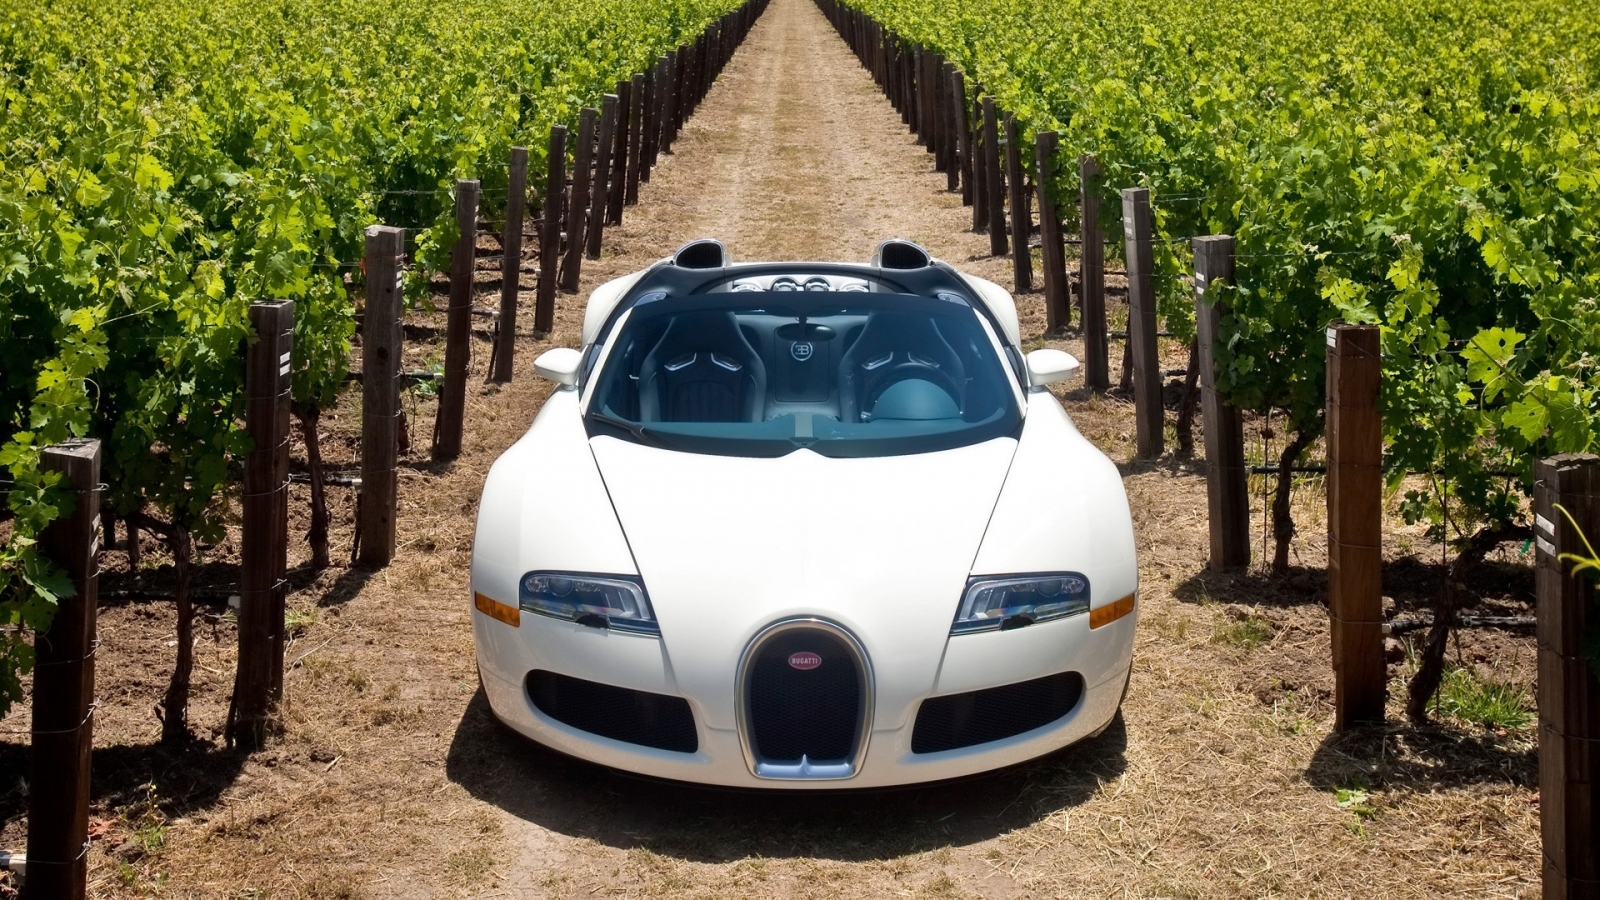 Bugatti Veyron 16.4 Grand Sport 2010 in Napa Valley - Front 2 for 1600 x 900 HDTV resolution